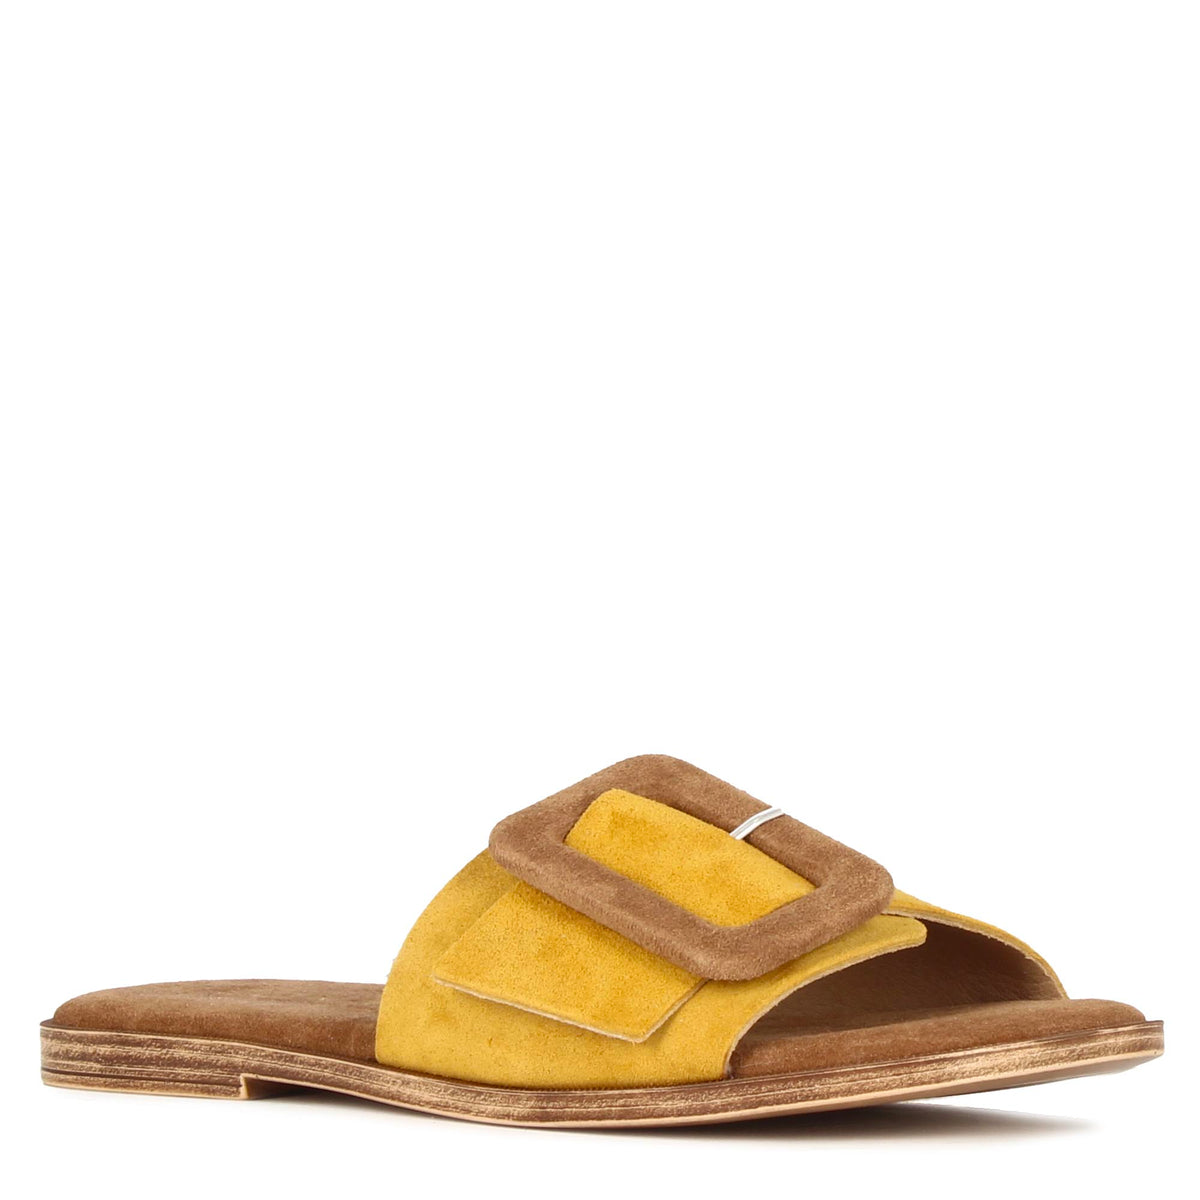 Women's yellow and brown suede slippers